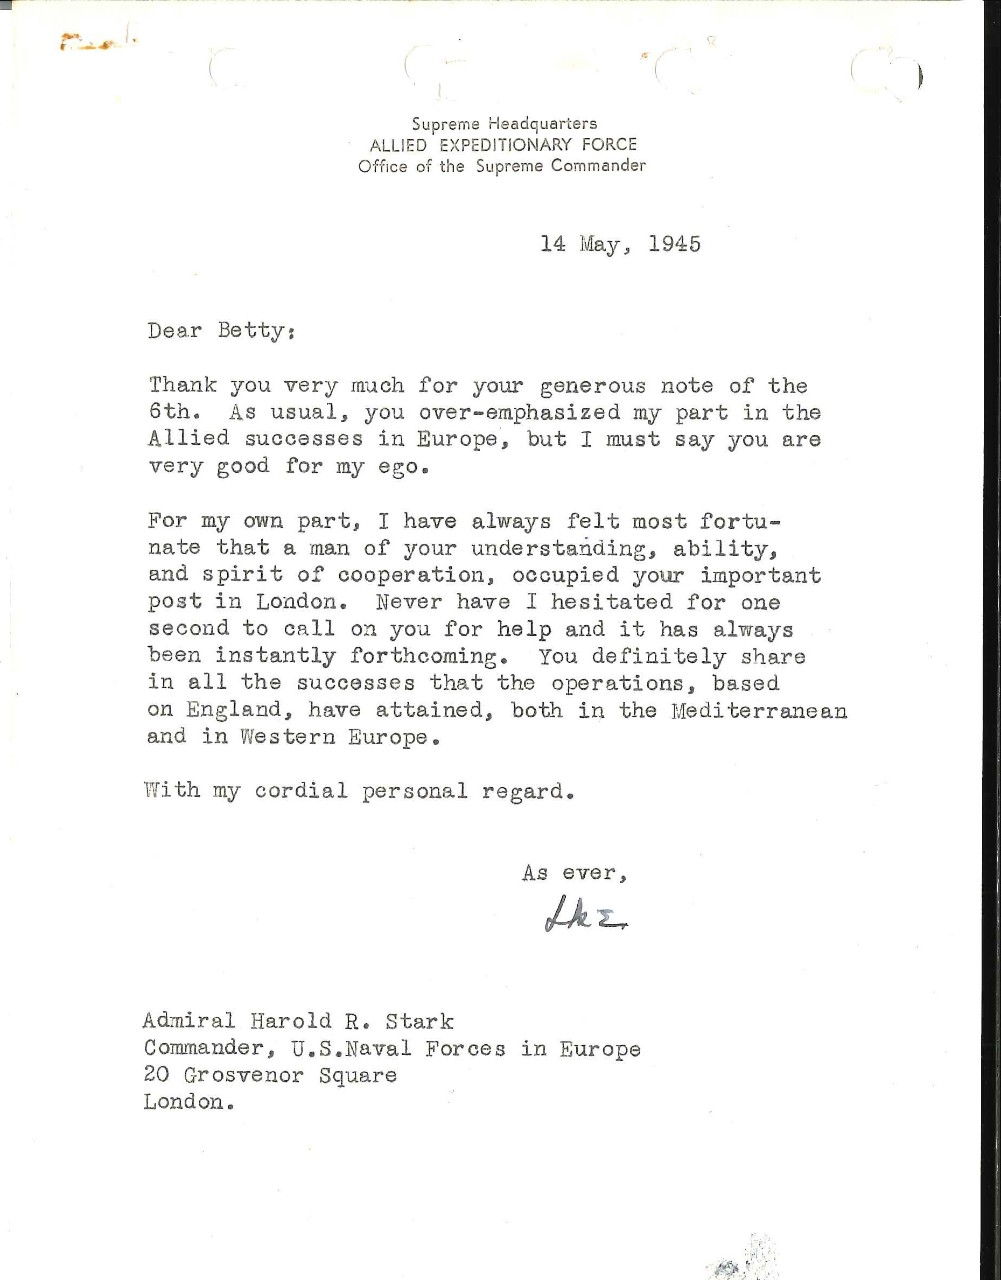 Letter from General Dwight D. Eisenhower to Admiral Harold "Betty" Stark, May 14, 1945